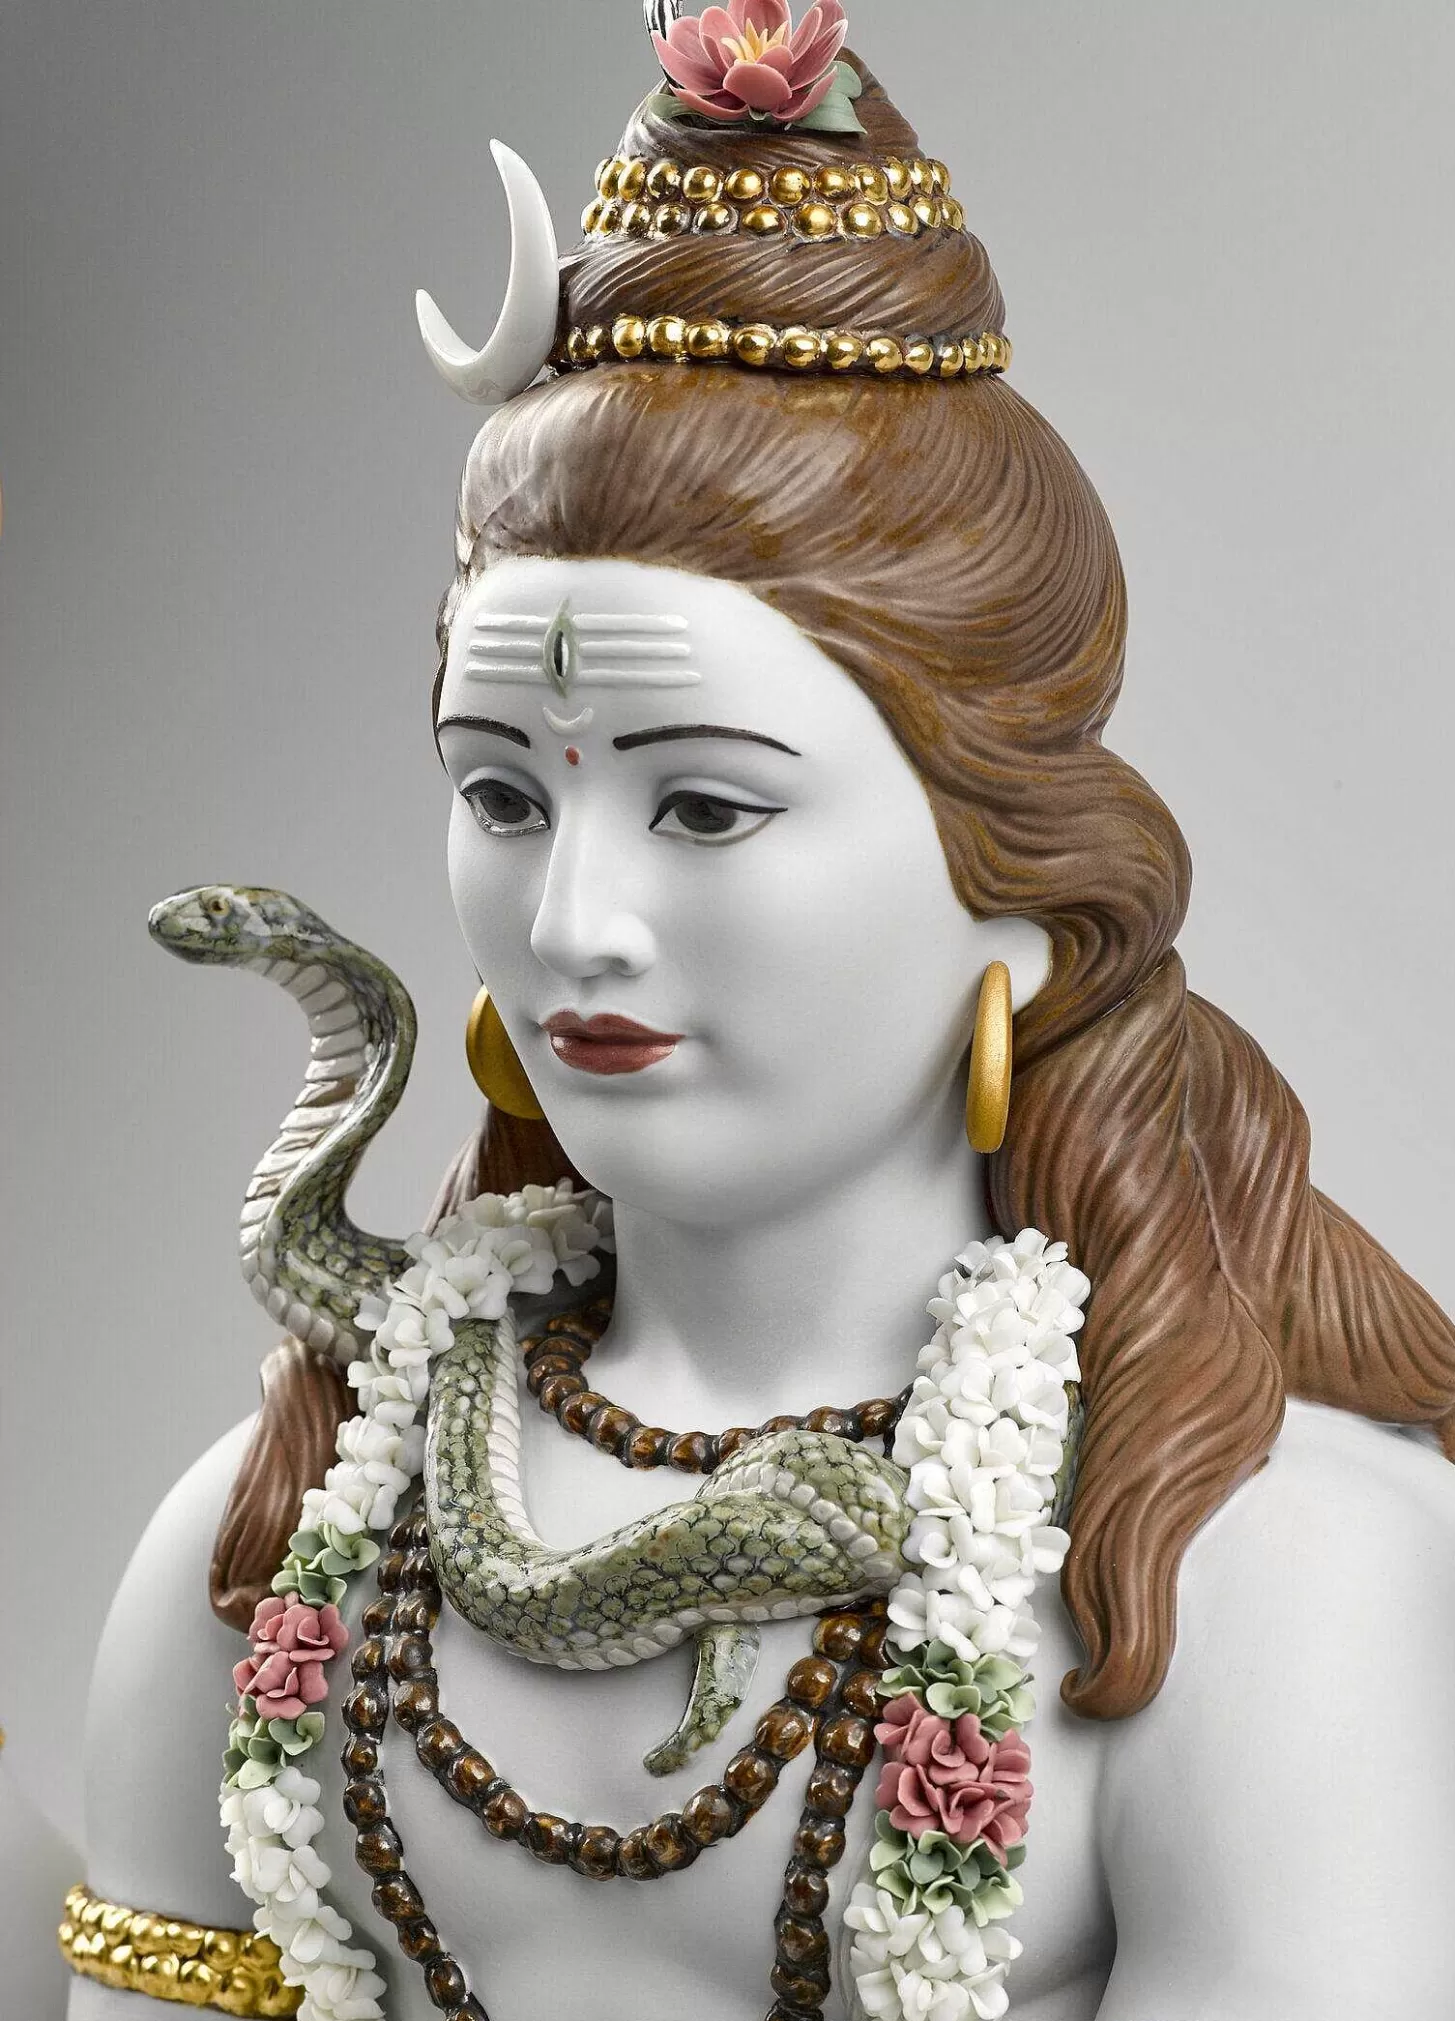 Lladró Lord Shiva Sculpture. Limited Edition^ High Porcelain